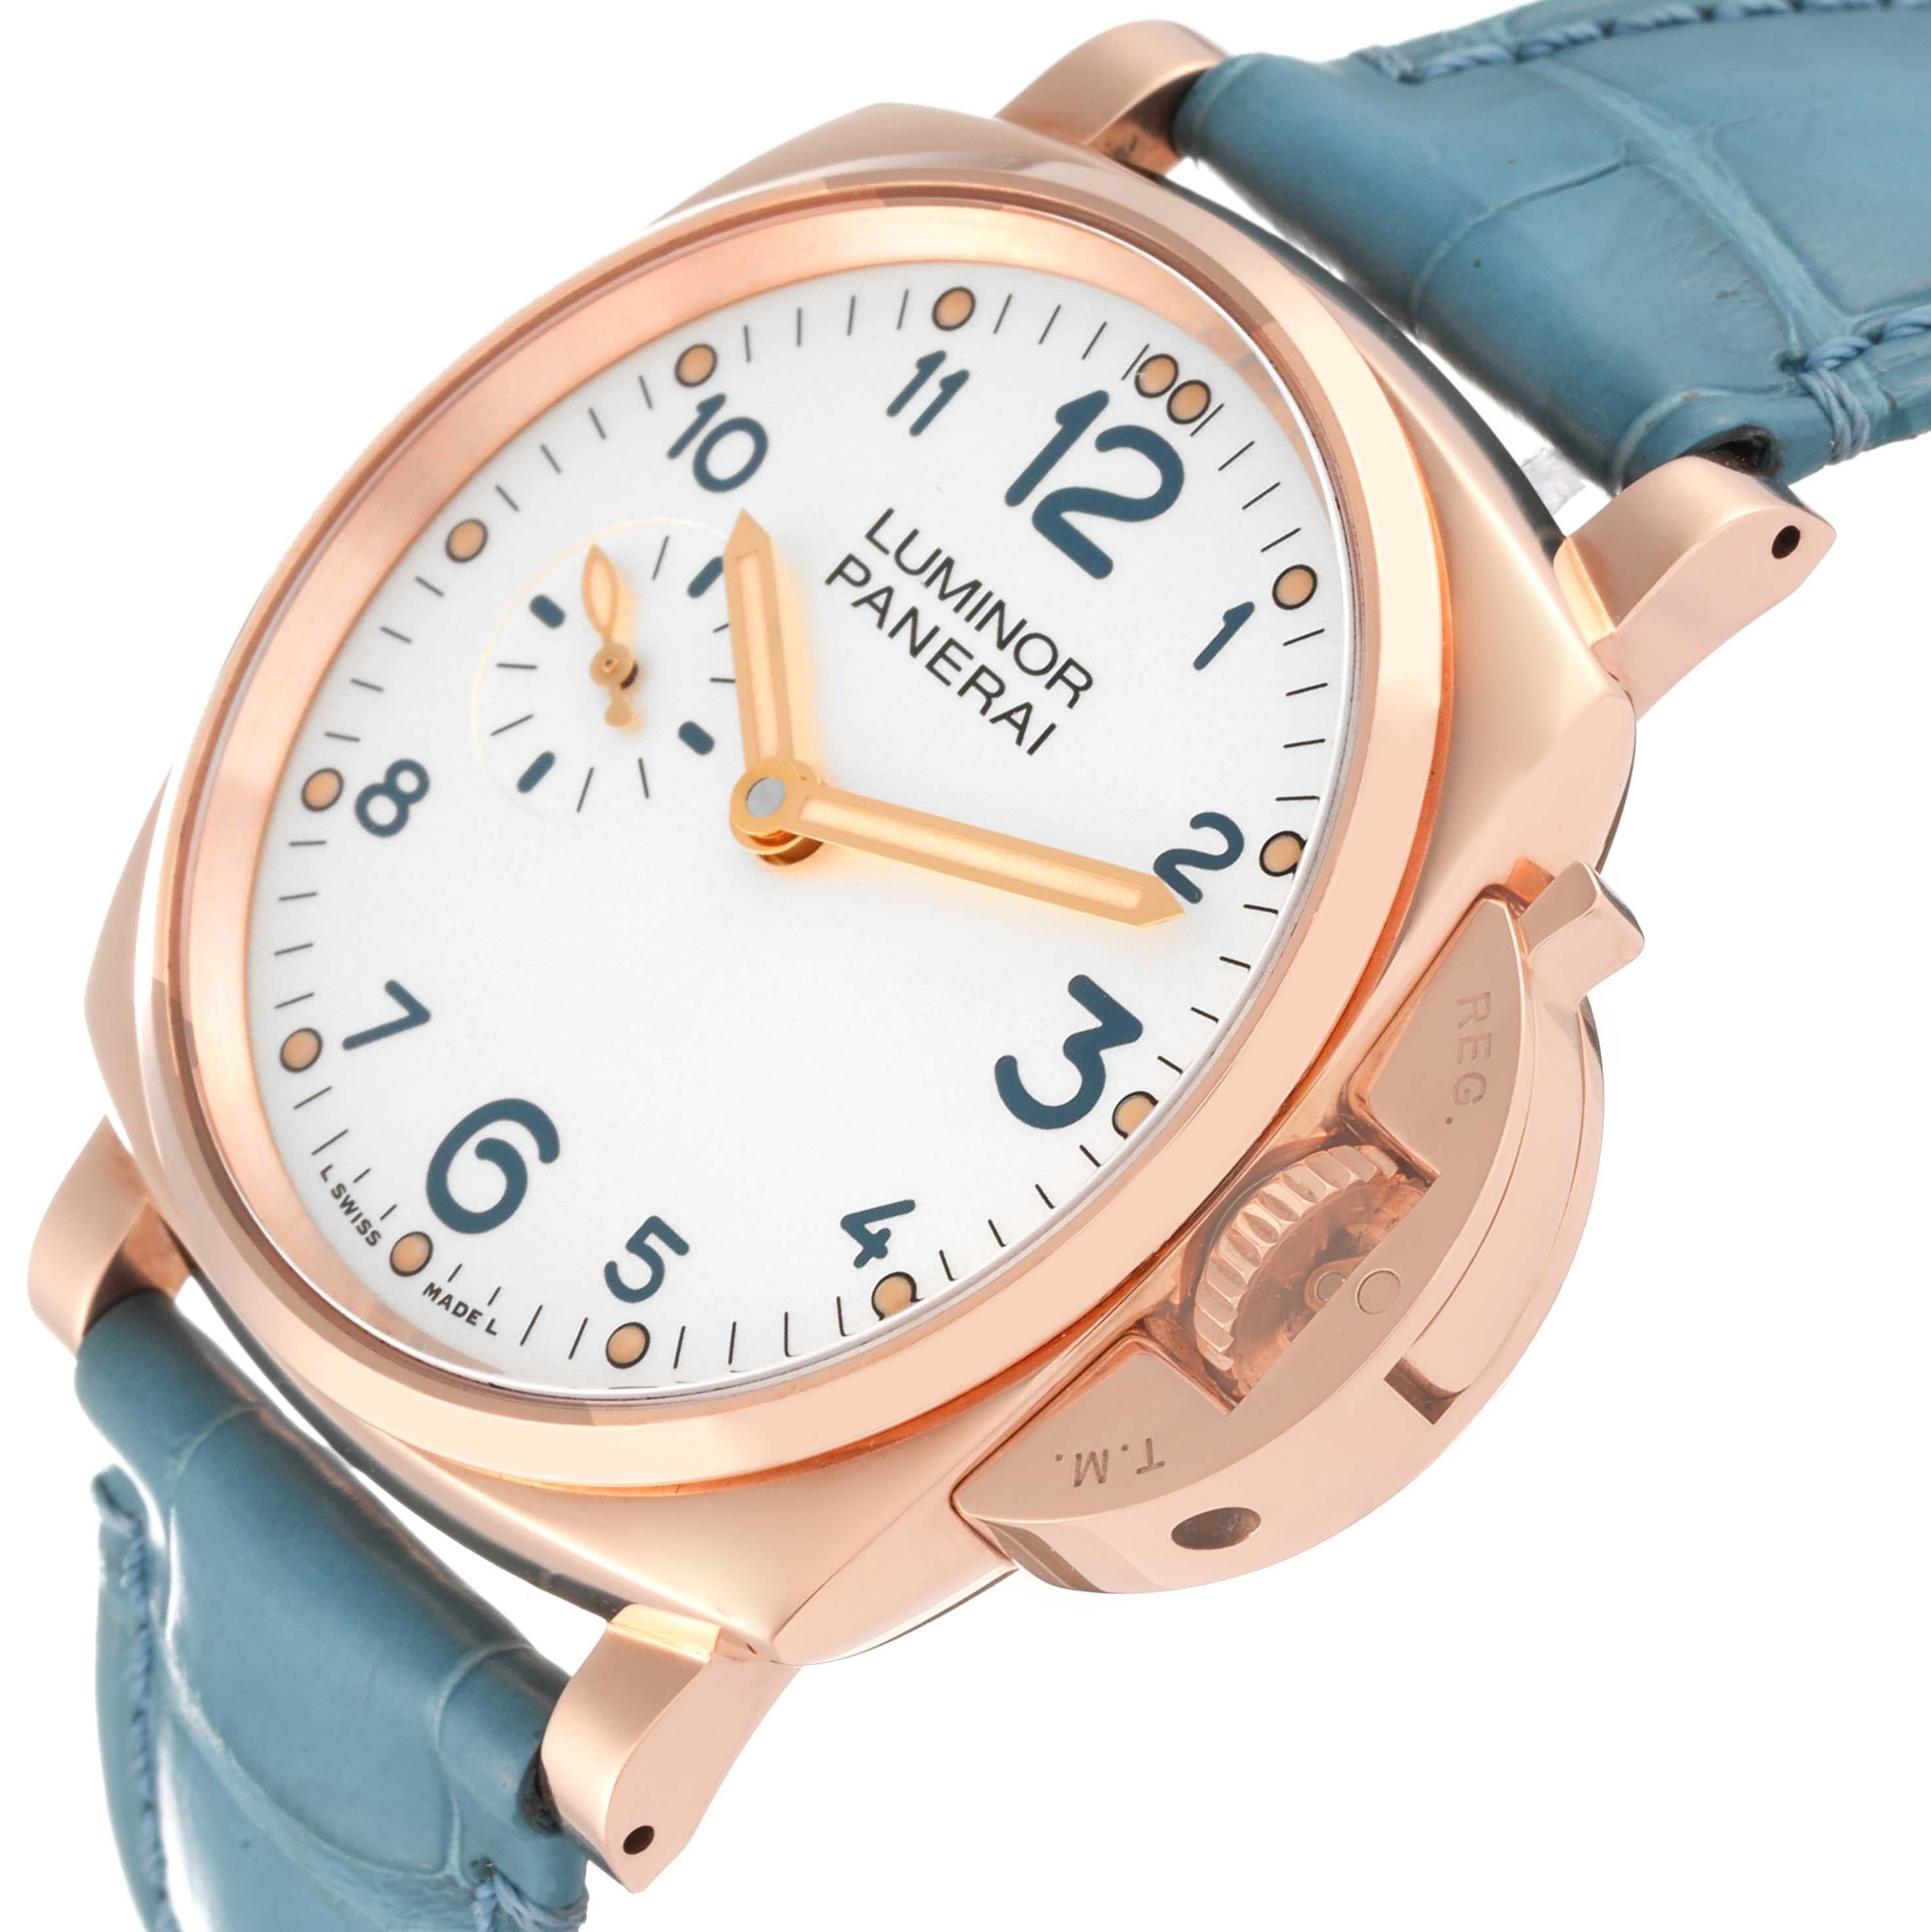 Men's Panerai Luminor Due Rose Gold Ivory Dial Mens Watch PAM00741 For Sale